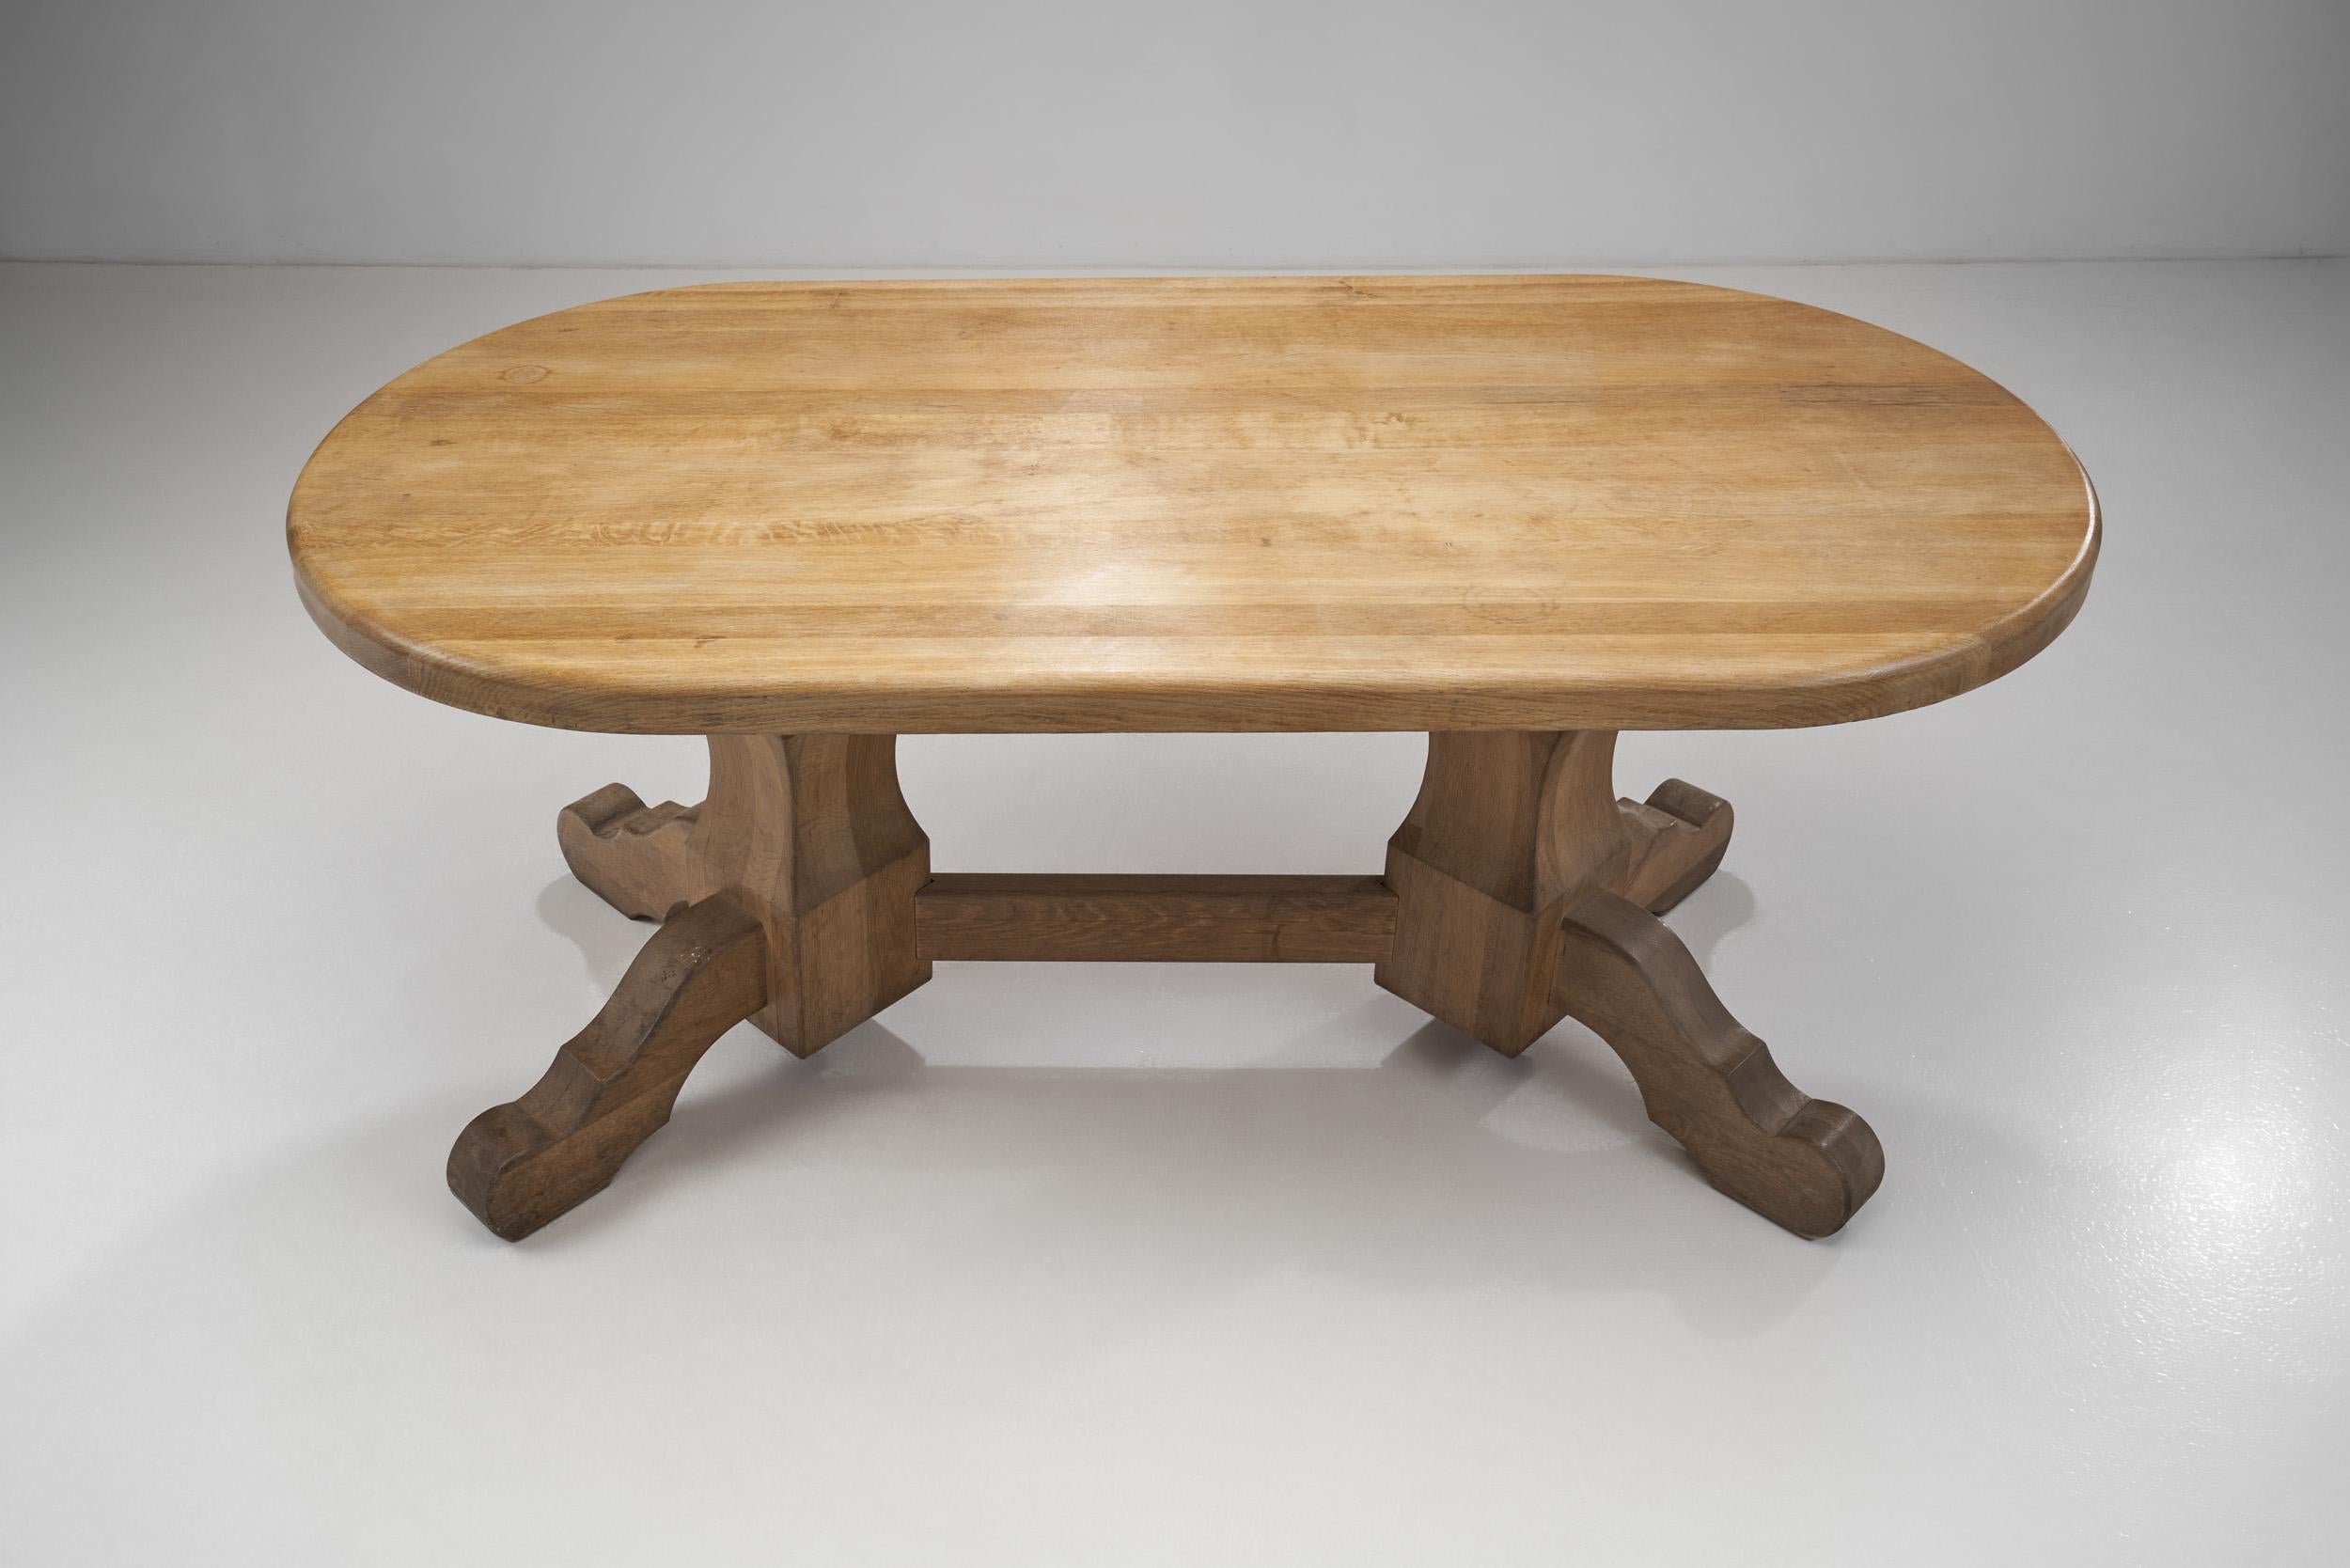 Late 20th Century De Puydt Oak Dining Table with Carved Legs, Belgium 1970s For Sale